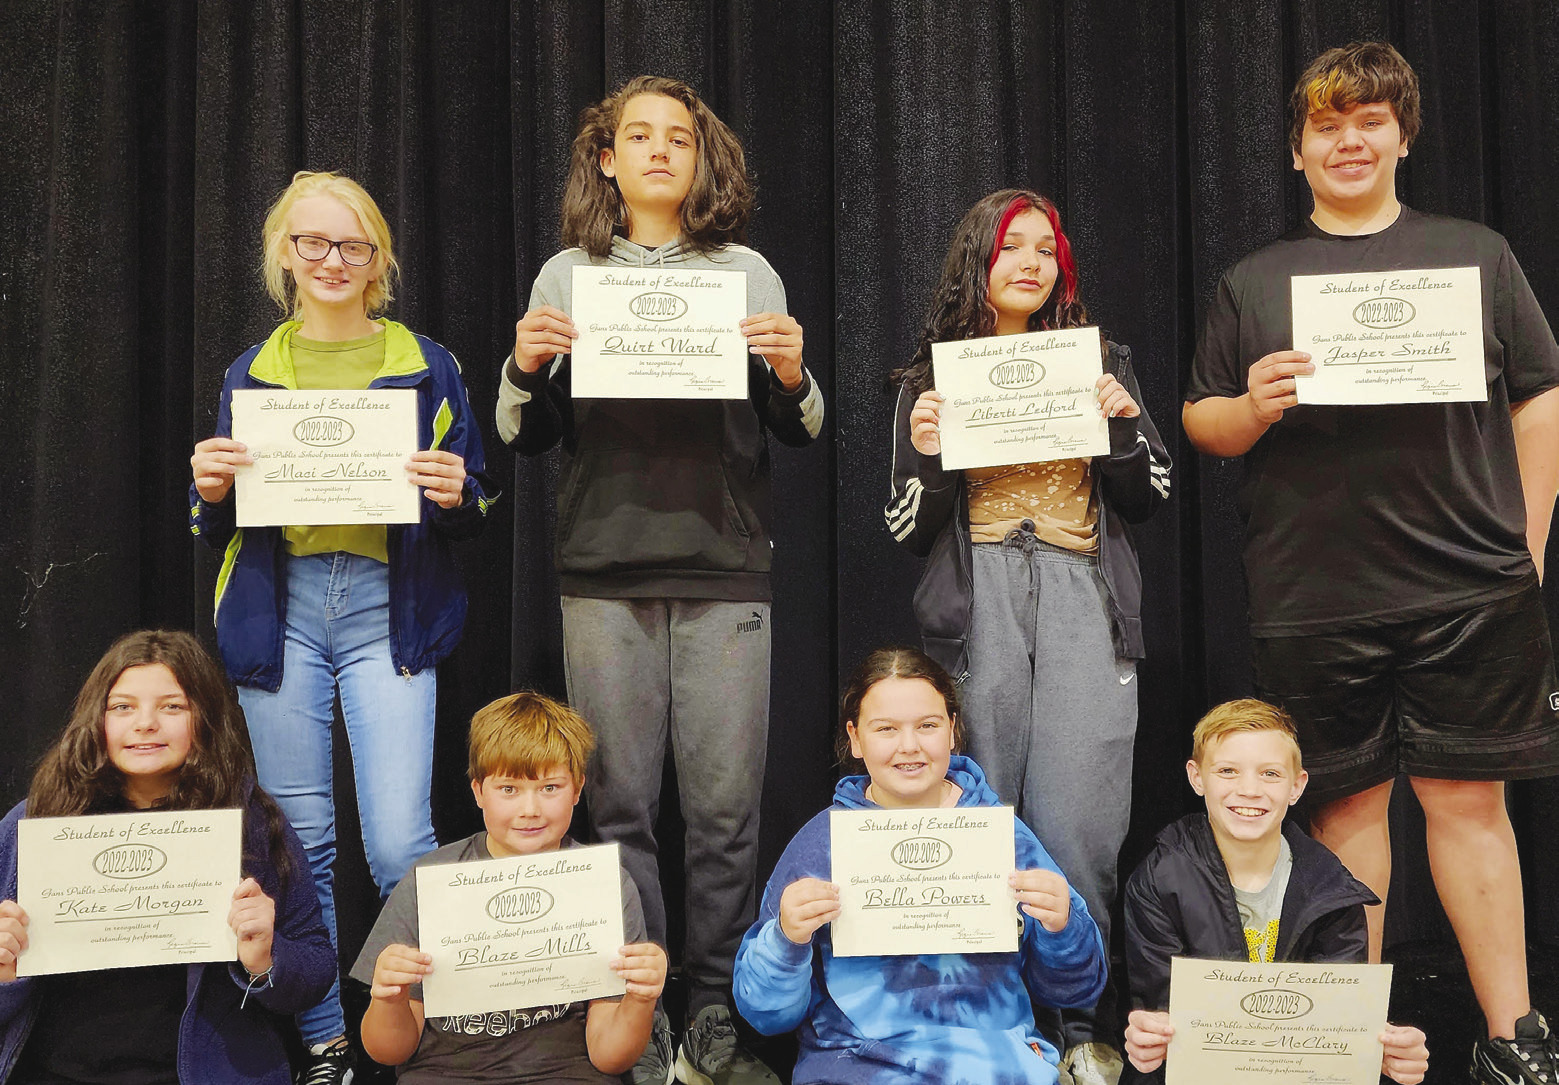 Gans middle school The Gans Middle School Students of Excellence for the first nine weeks are Kate Morgan, Blake Mills, Bella Powers, Blaze McClarey, Maci Nelson, Quirt Ward, Liberti Ledford and Jasper Smith.